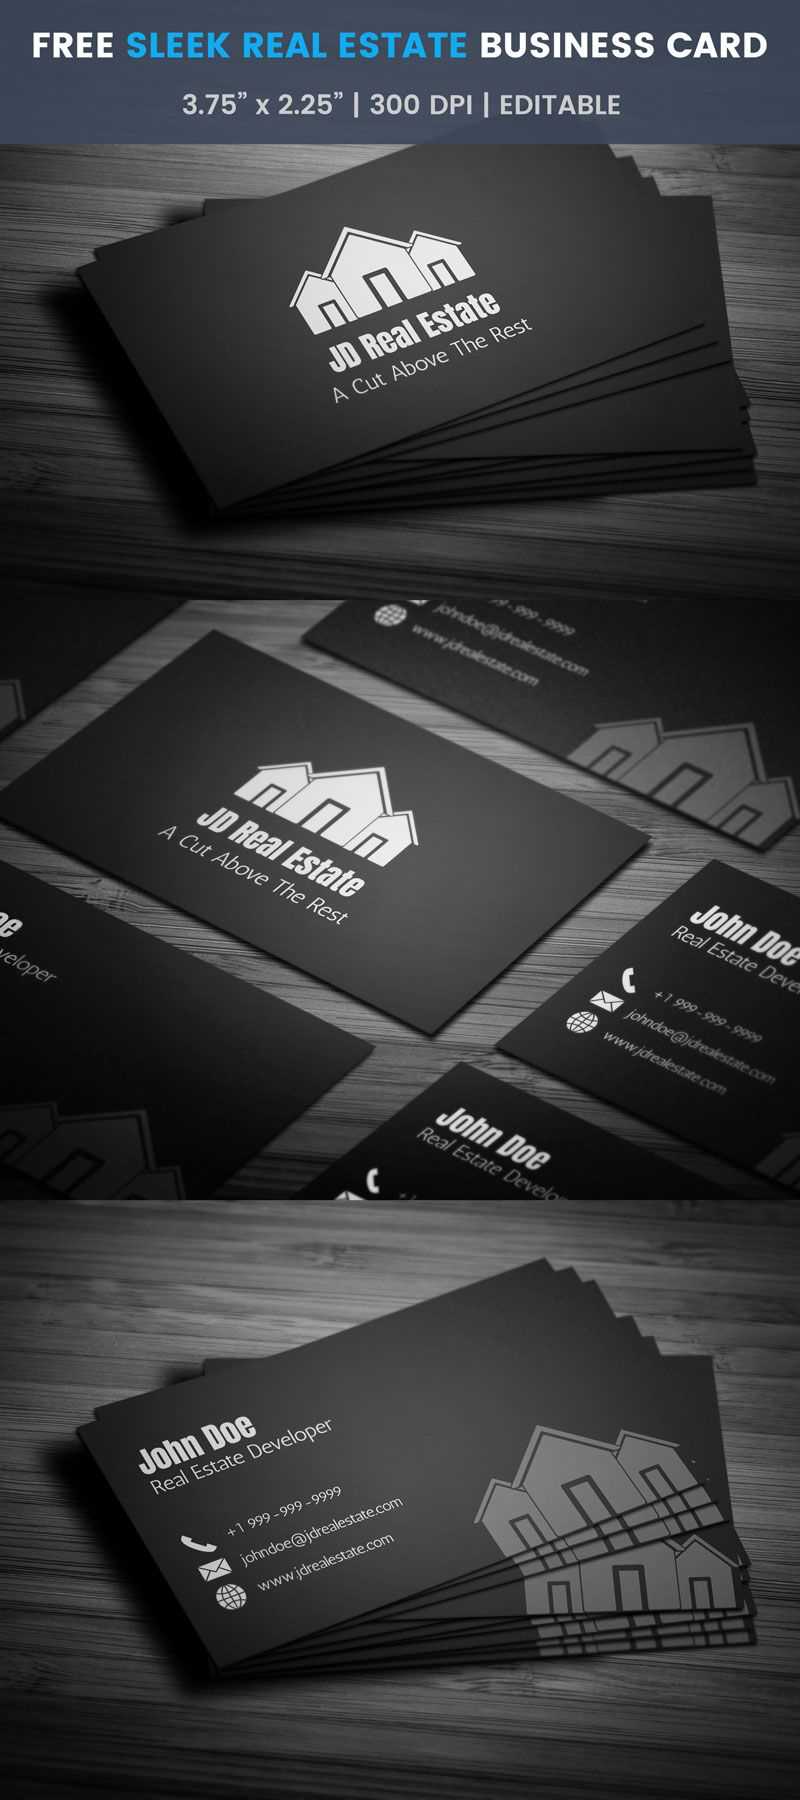 Sleek Real Estate Business Card – Full Preview | Free With Real Estate Business Cards Templates Free